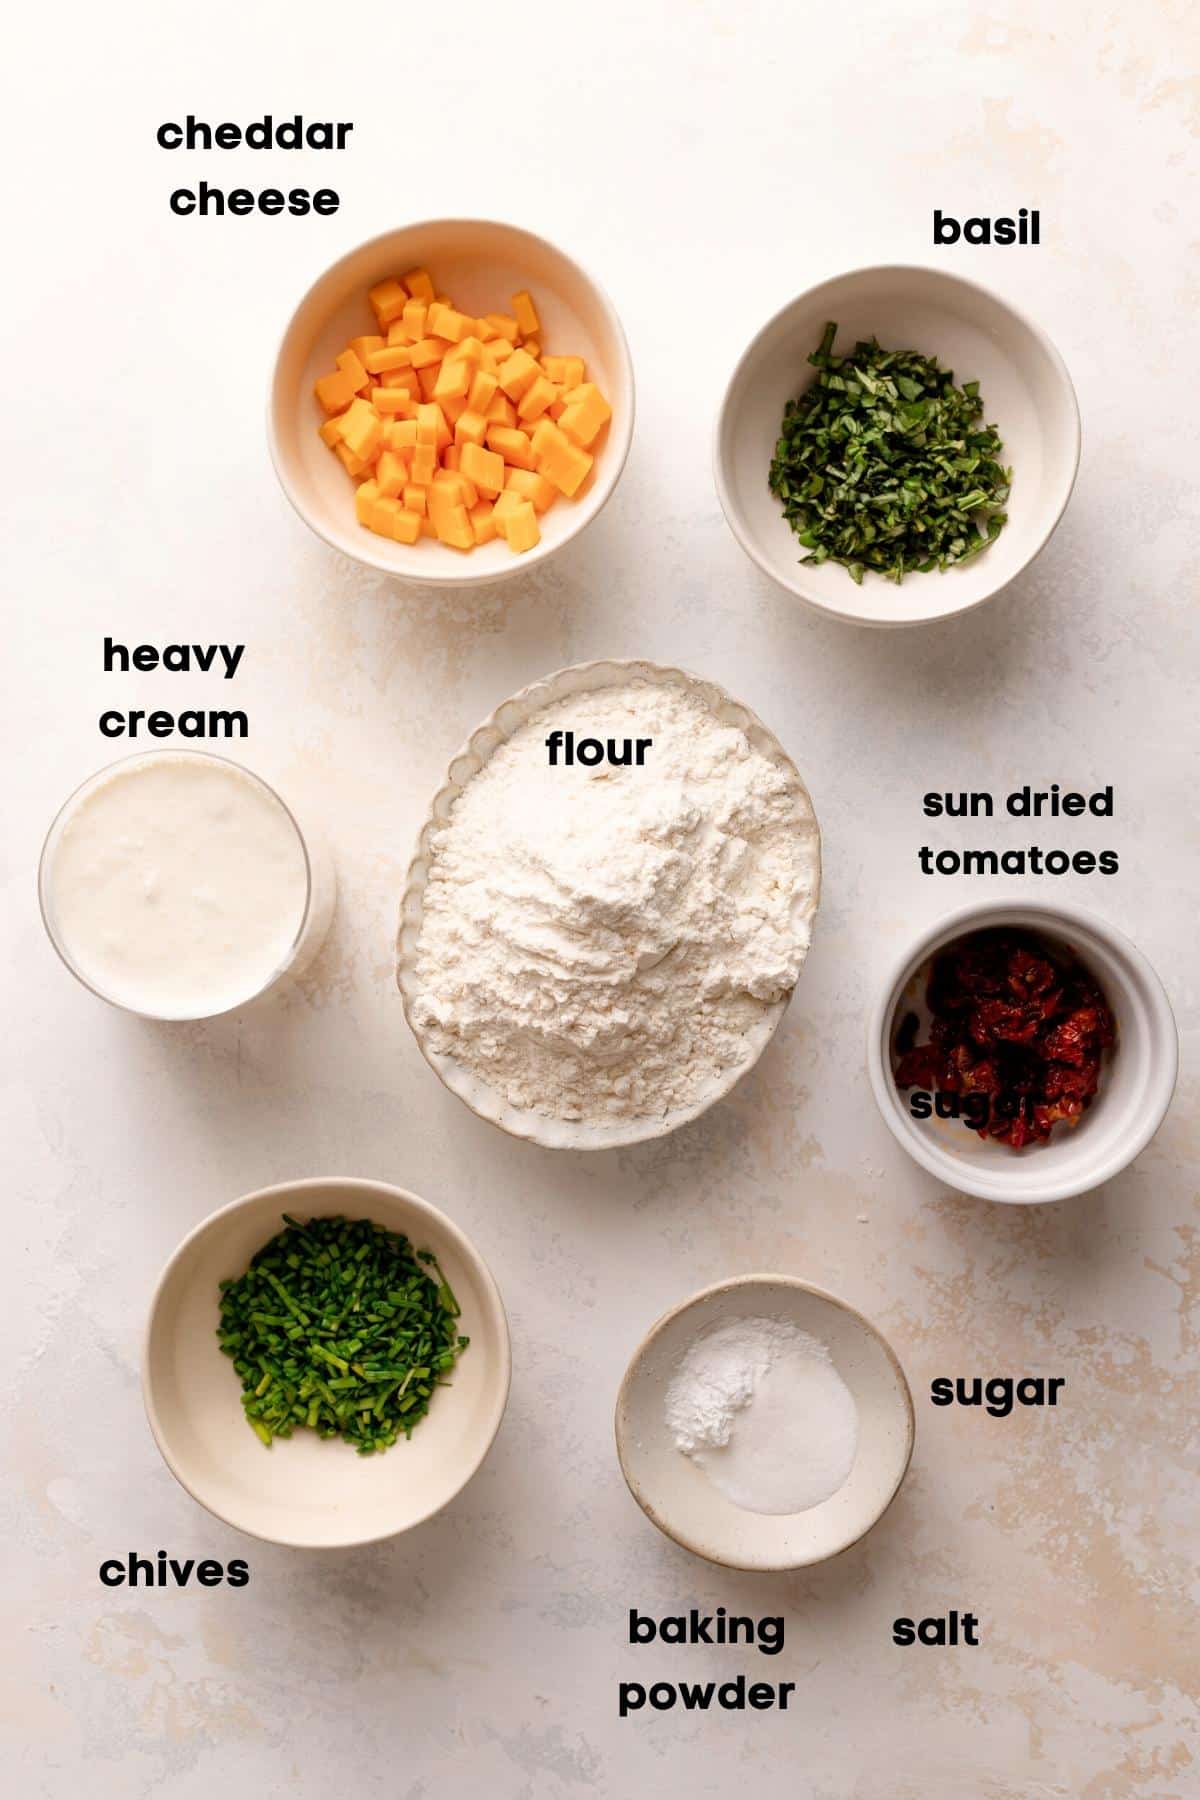 ingredients needed to make this recipe.